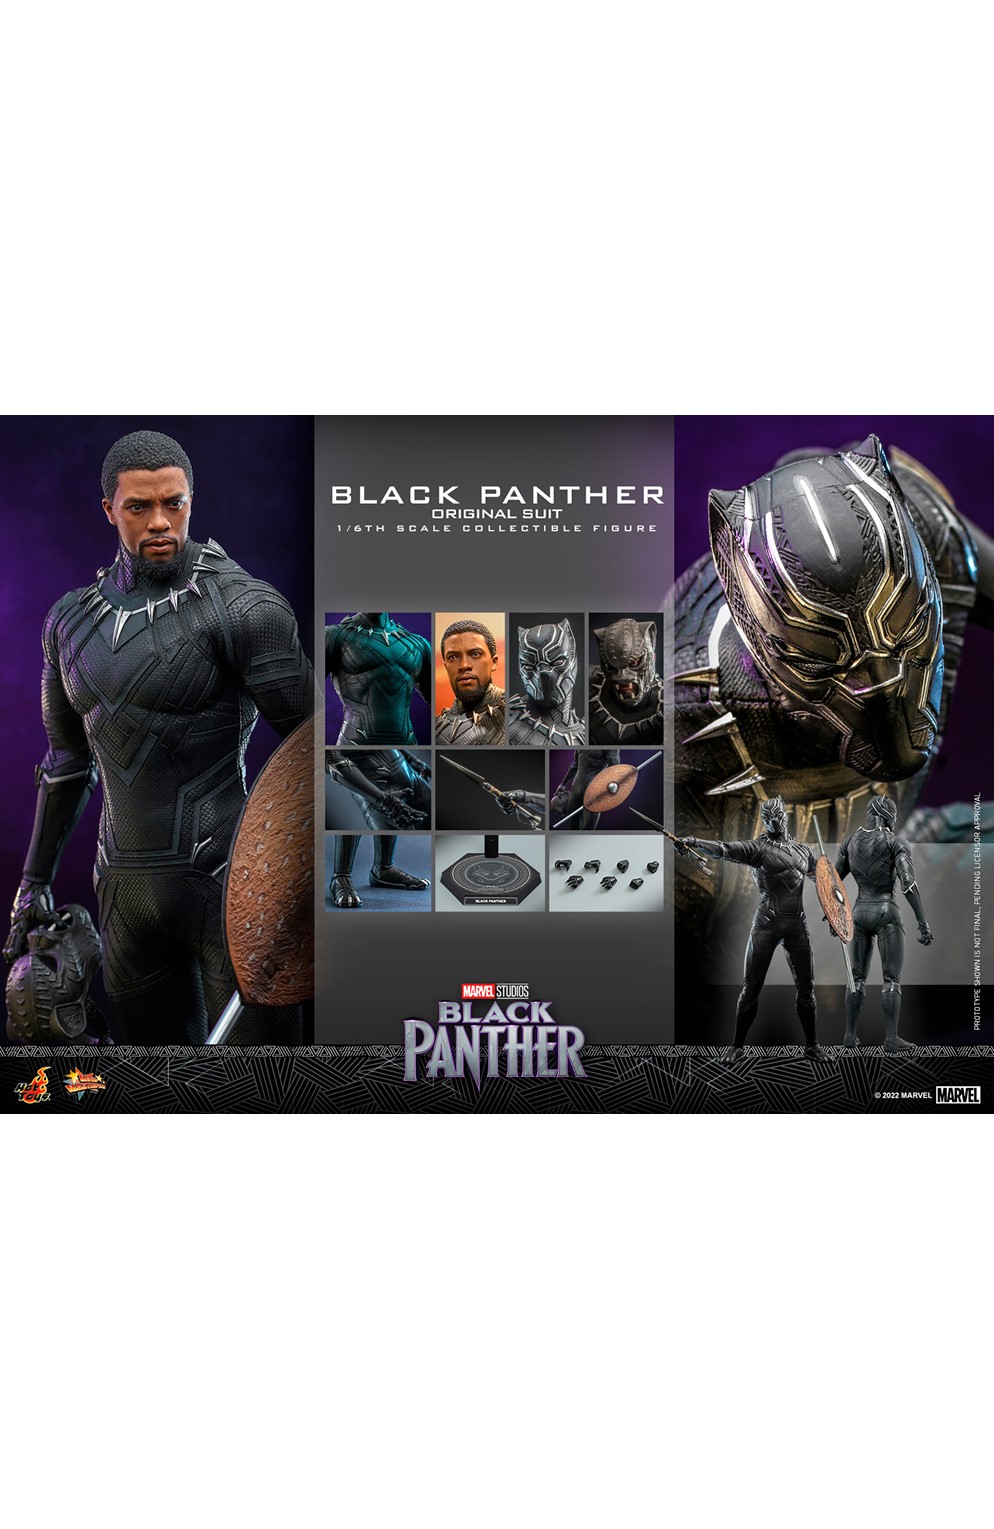 Black Panther (Original Suit) Sixth Scale Figure by Hot Toys - Black Panther Legacy